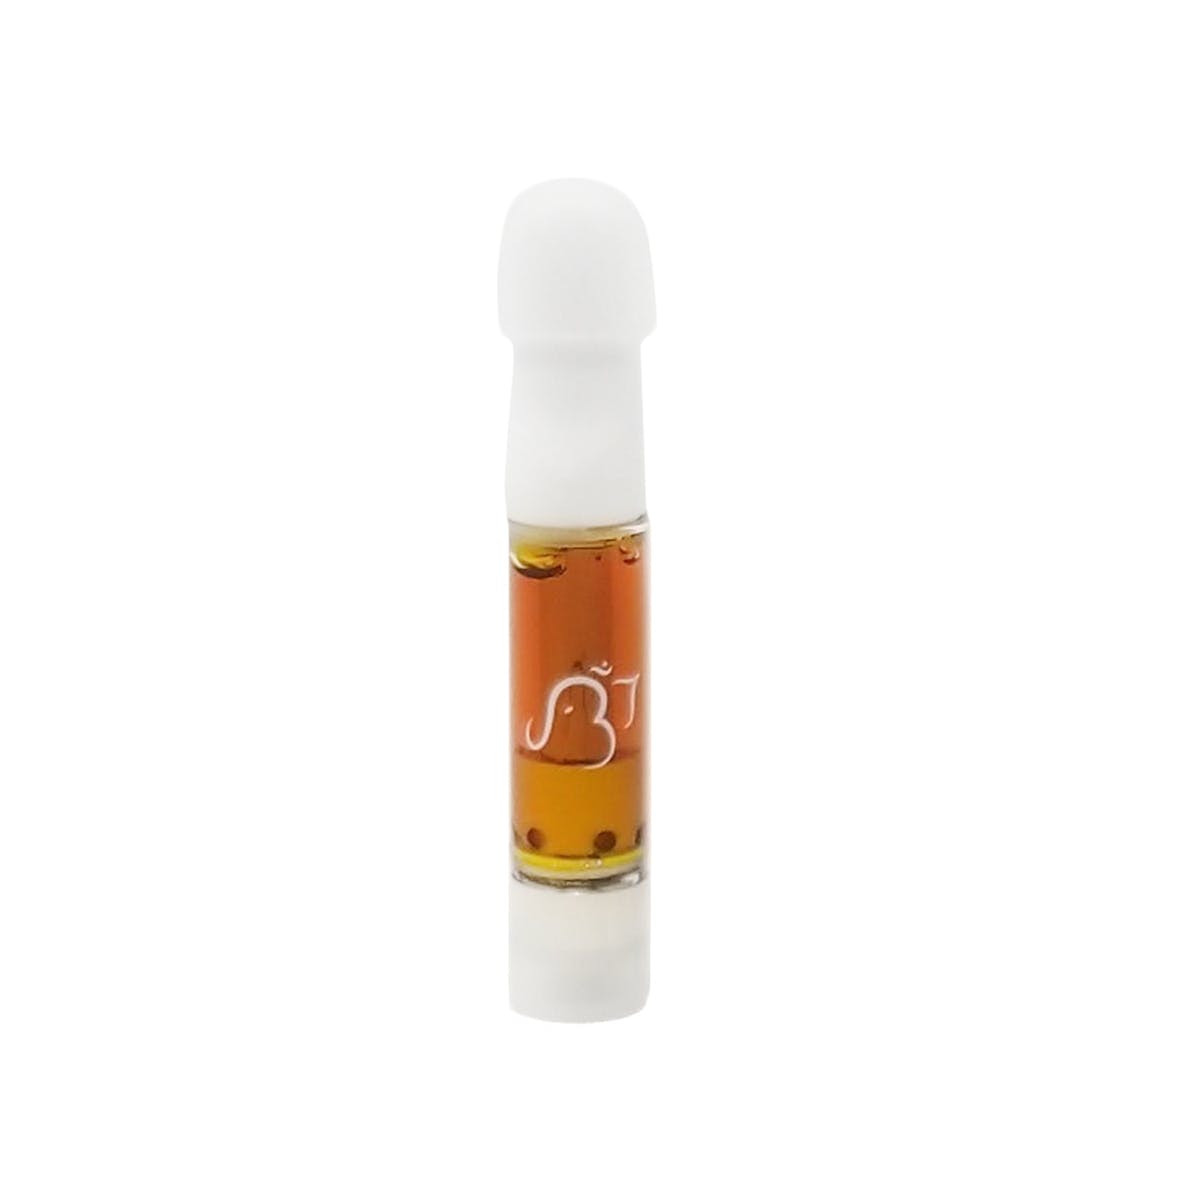 concentrate-om-extracts-cactus-full-spectrum-co2-vape-cartridge